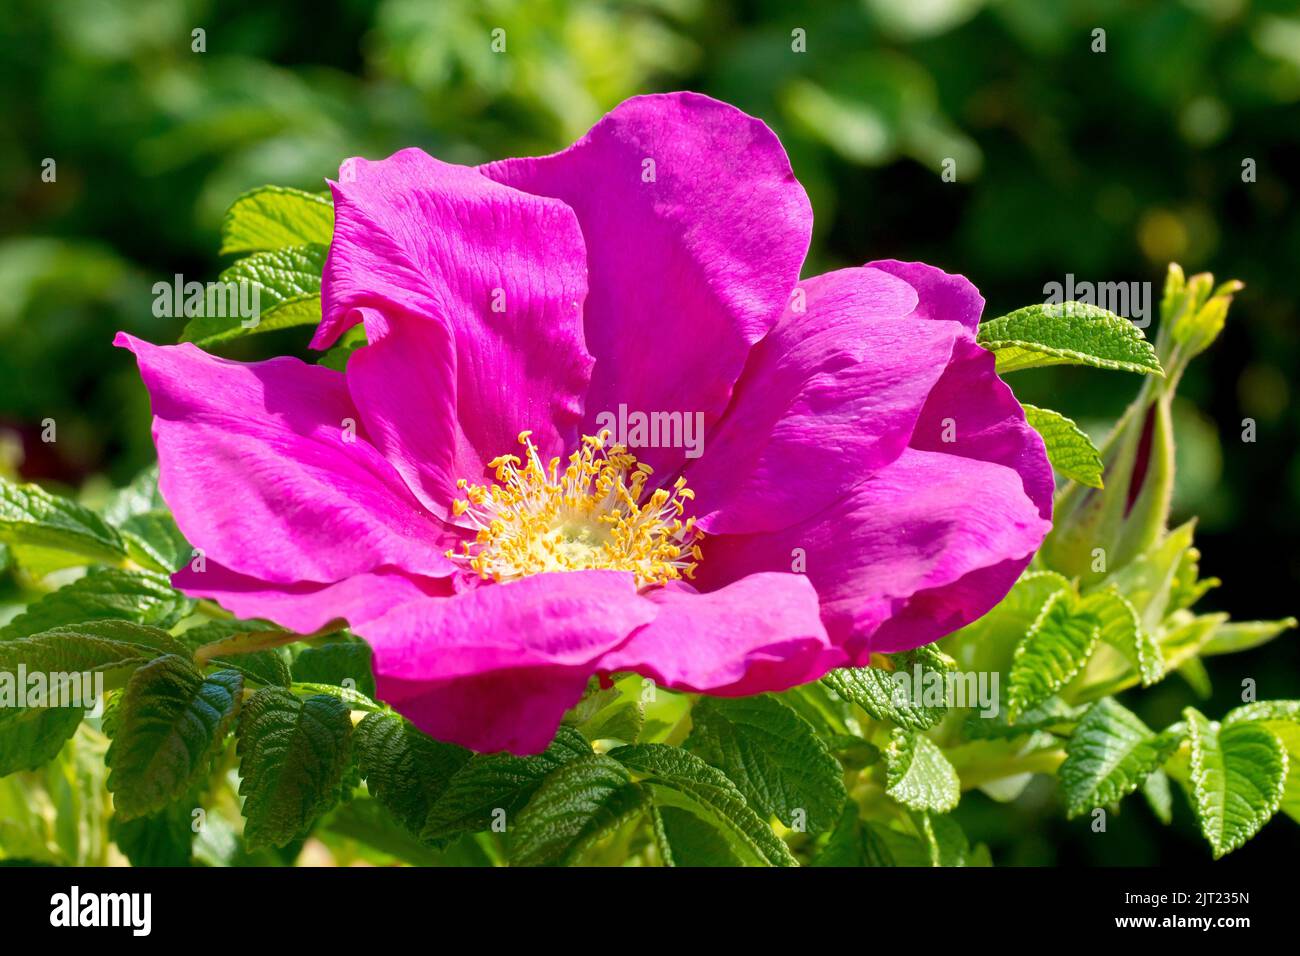 Wild Rose or Japanese Rose (rosa rugosa rubra), close up of a single large pink flower of the commonly planted and naturalised shrub. Stock Photo